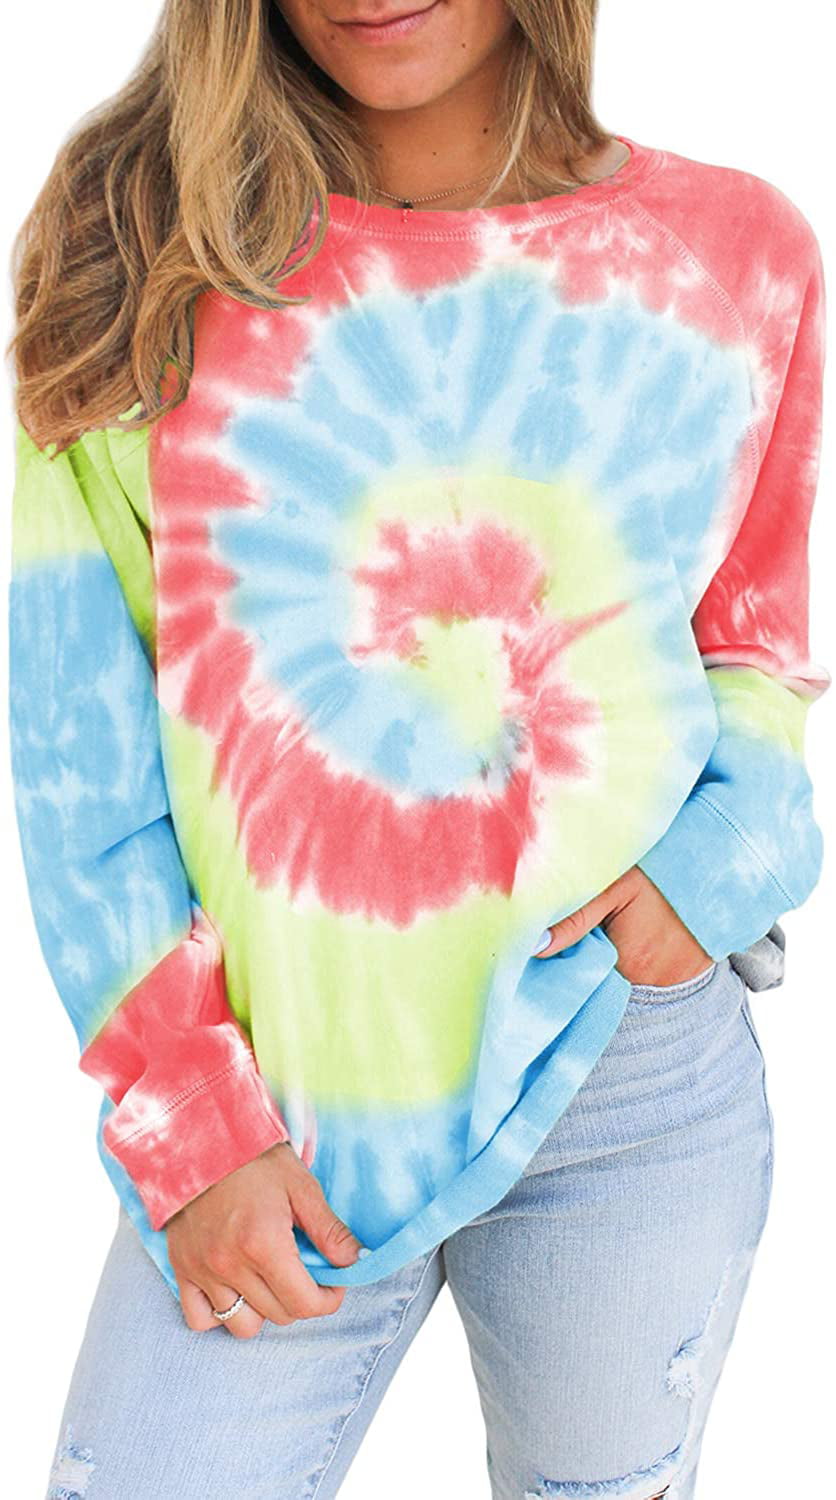 Men's Sweatshirts Tie Dye Print Striped Color Block Long Sleeve Comfy Loose Soft Casual T Shirts Pullover